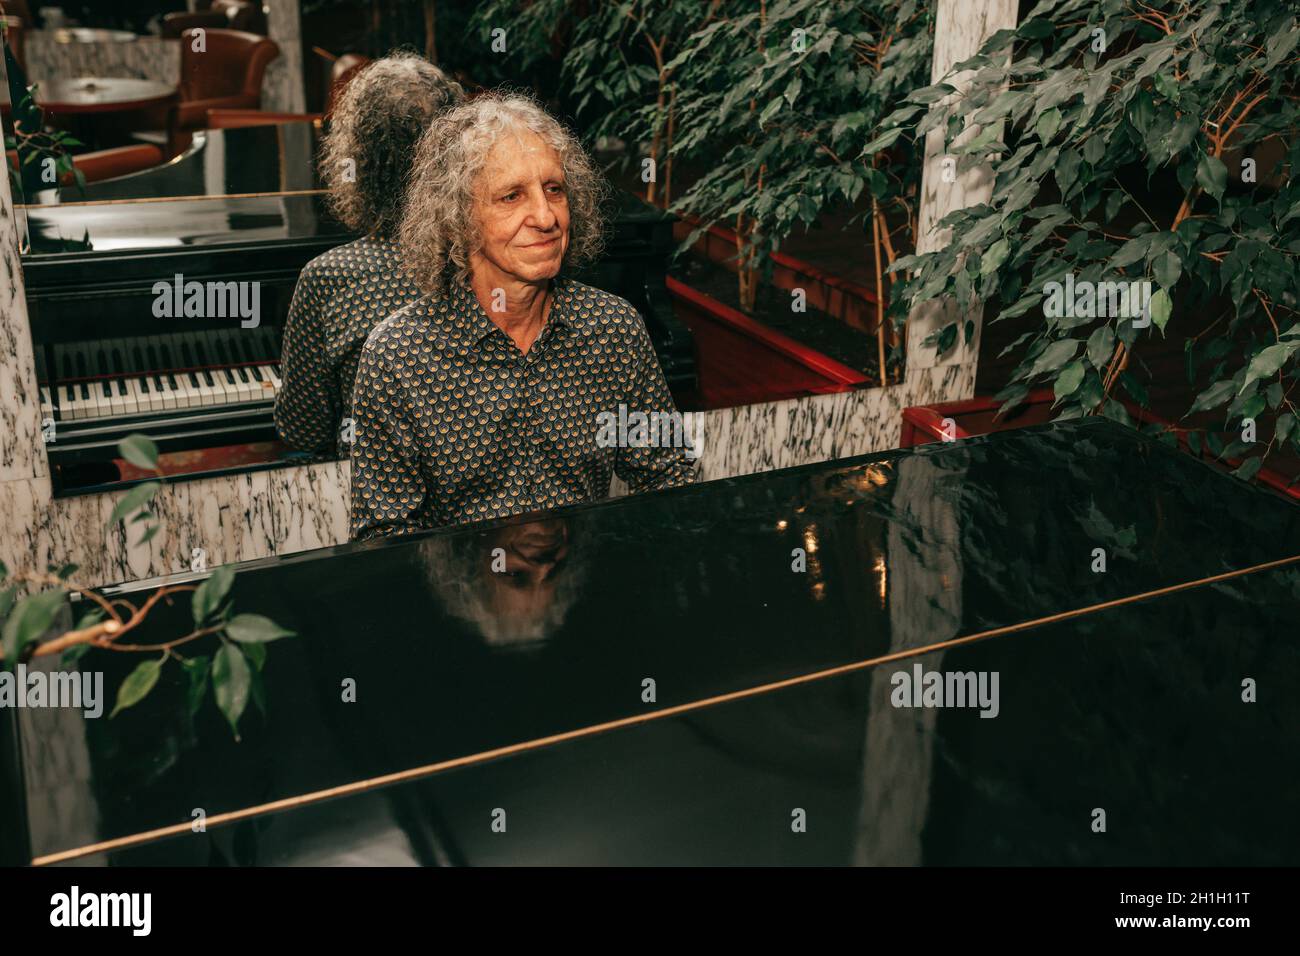 Portrait of man, age 60 - 65 years old, gray curly hair, sitting at piano and playing piece of music, focused, injoing melody. Stock Photo